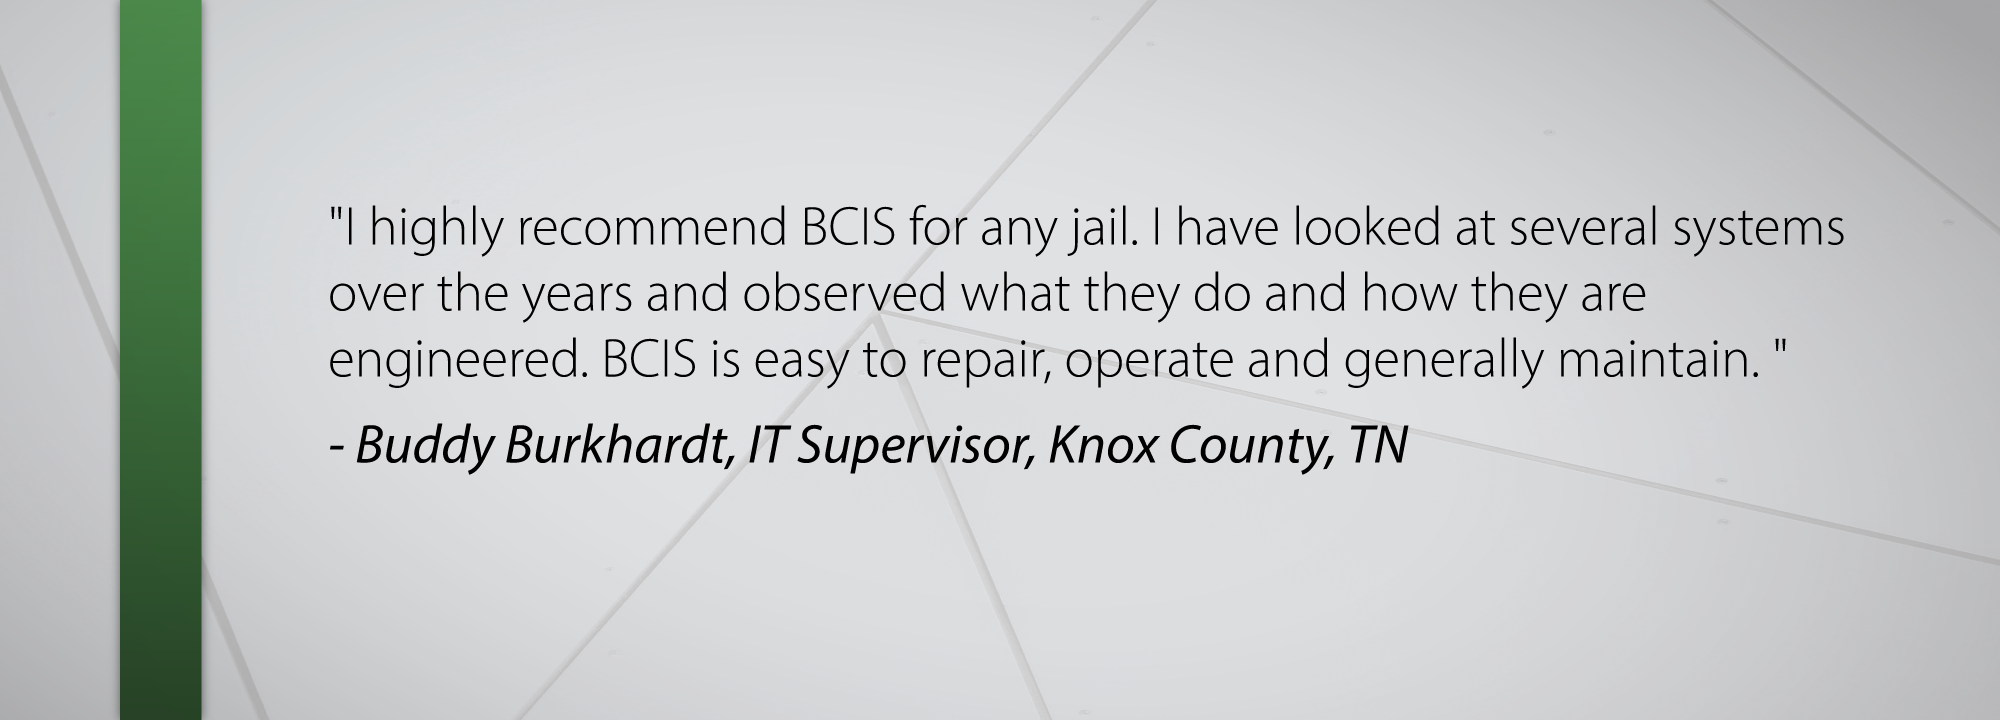 I highly recommend BCIS for any jail. I have looked at several systems over the years and observed what they do and how they are engineered. BCIS is easy to repair, operate and generally maintain. - Buddy Burkhardt, IT Supervisor, Knox County, TN